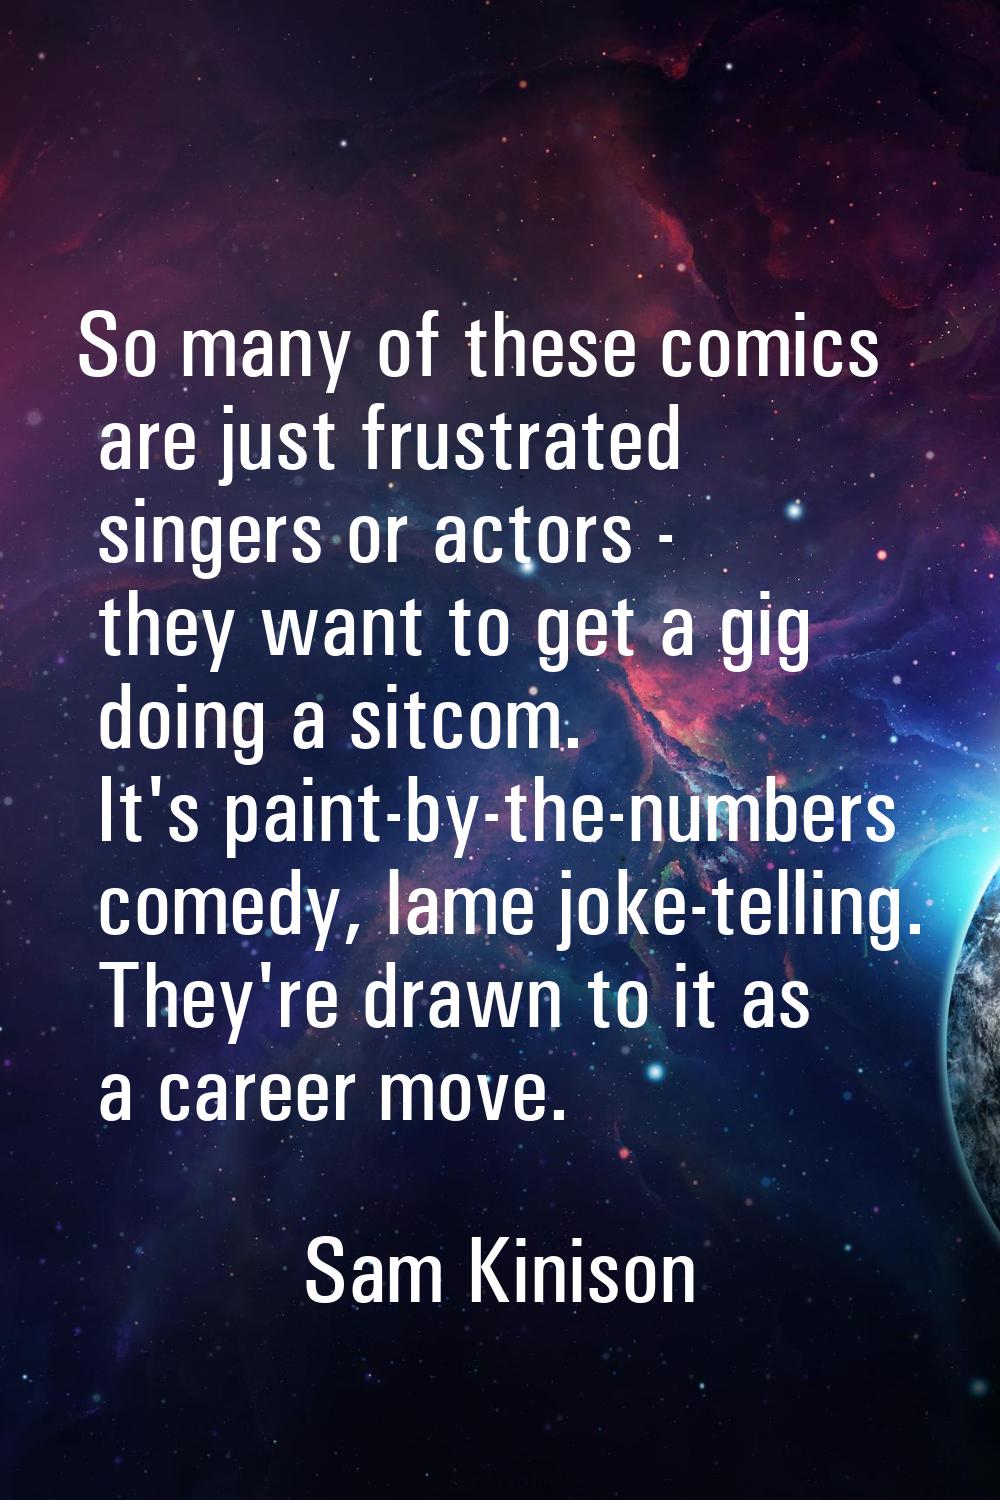 So many of these comics are just frustrated singers or actors - they want to get a gig doing a sitc